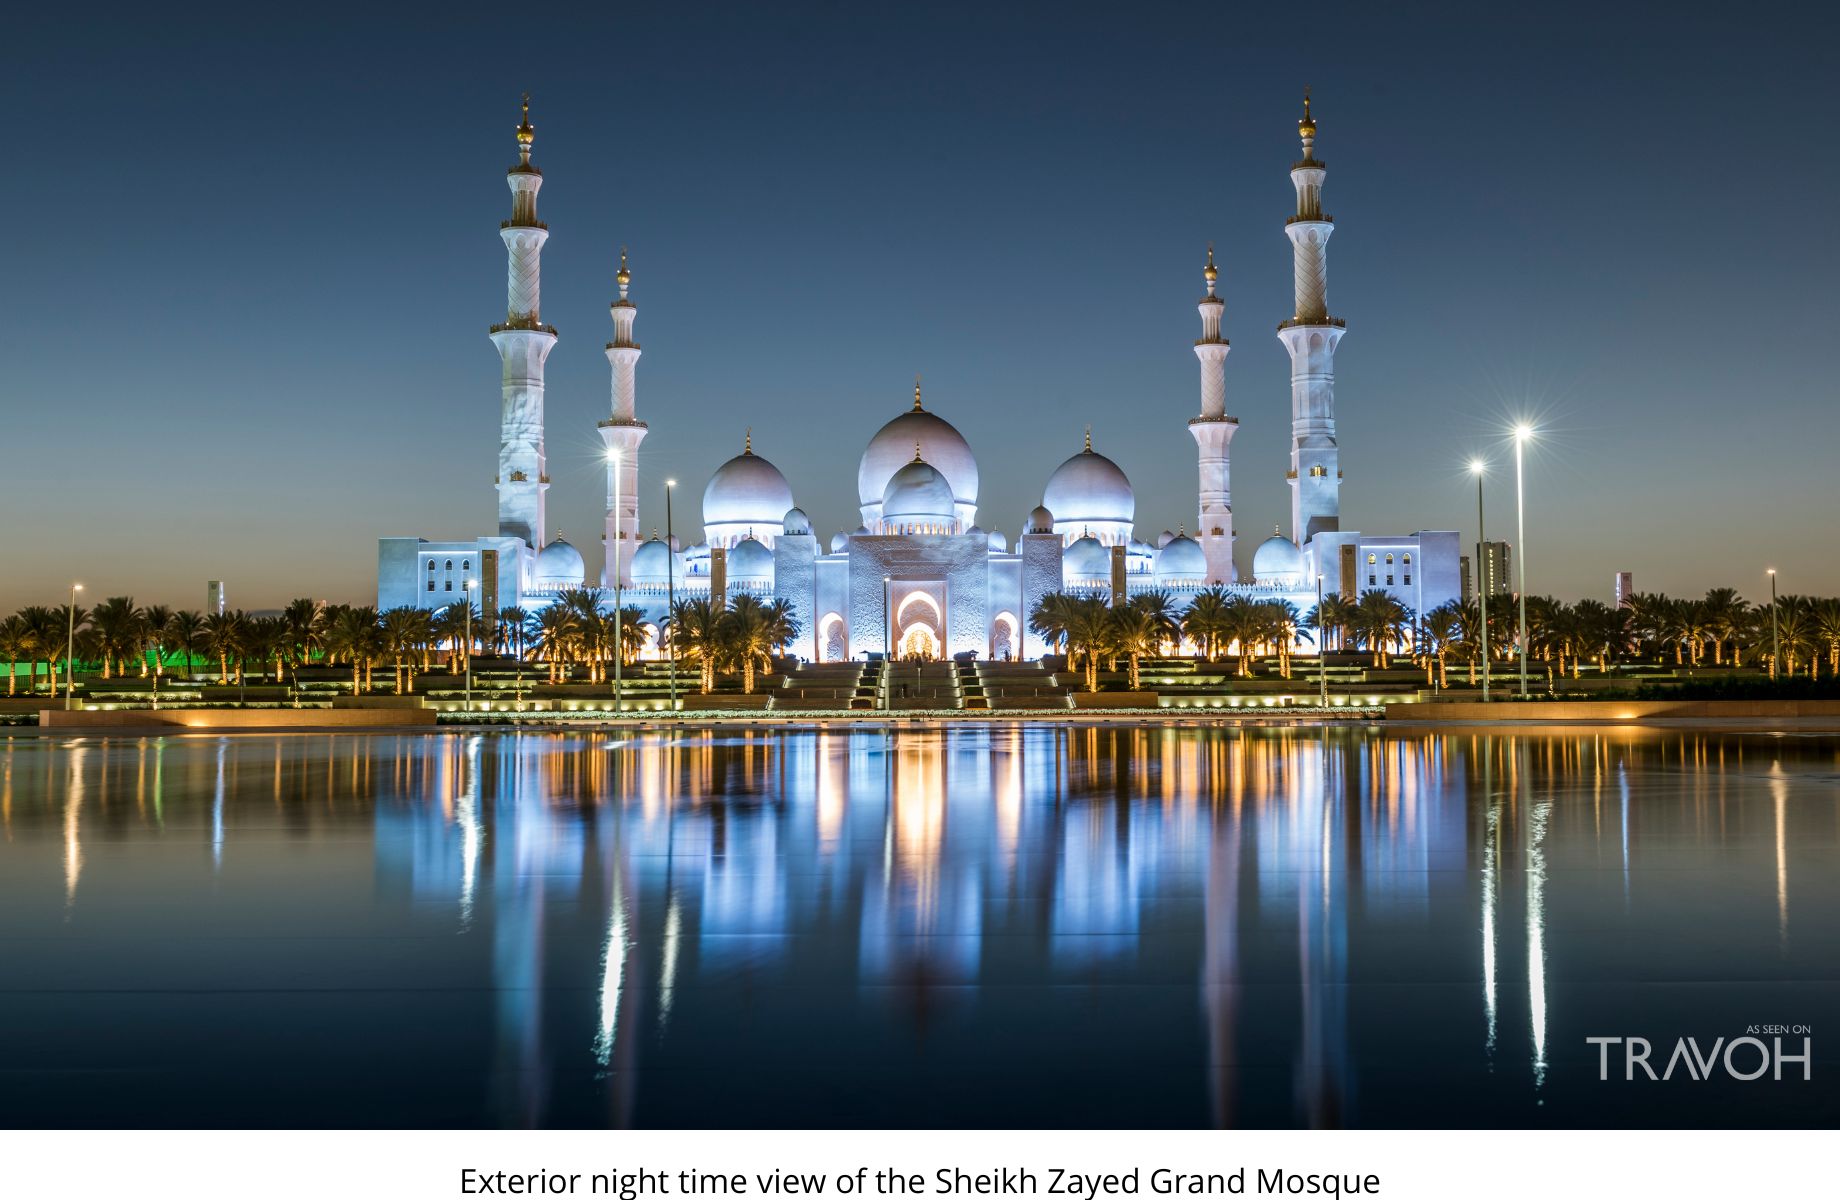 Exterior night time view of the Sheikh Zayed Grand Mosque